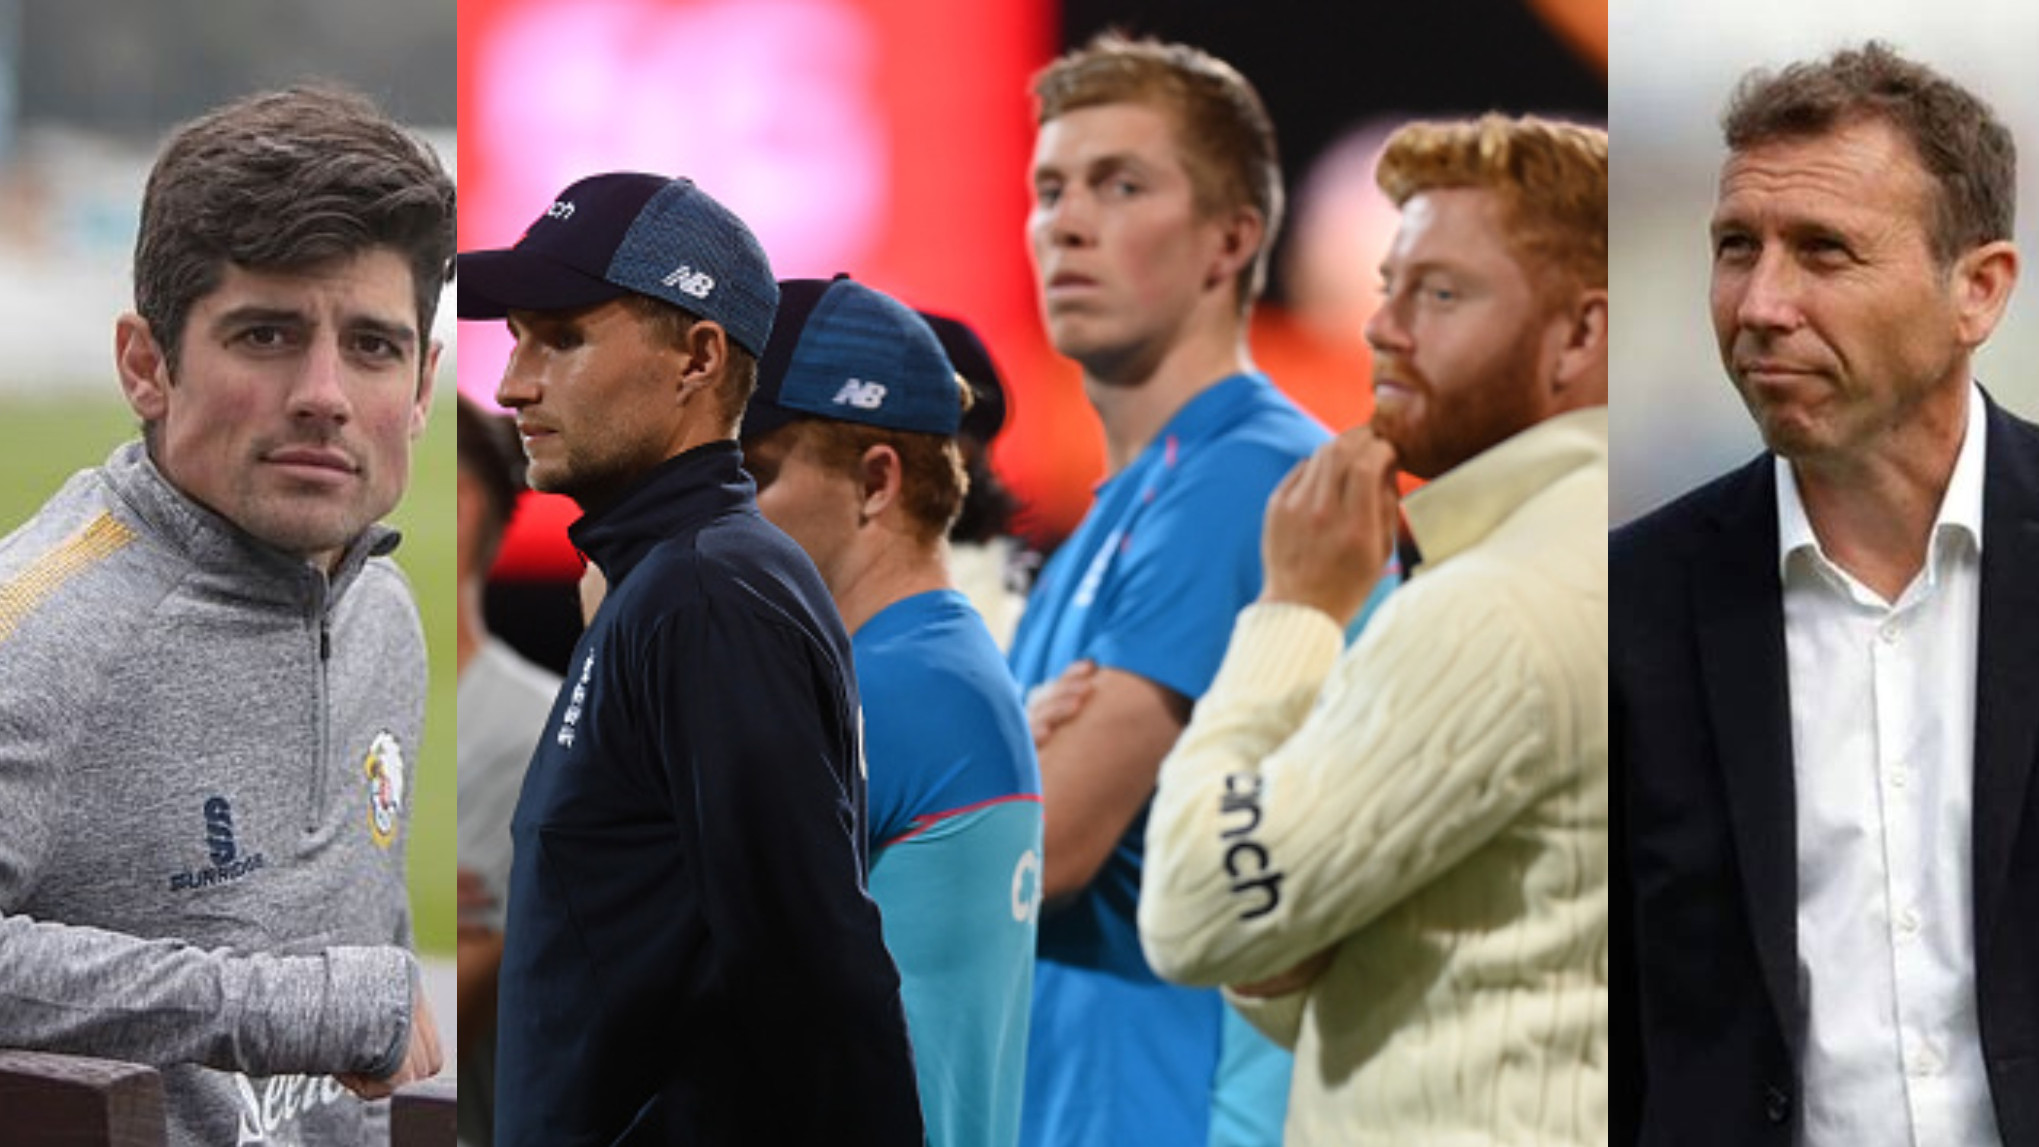 Ashes 2021-22: Rock Bottom- Sir Alastair Cook and Michael Atherton slam England team’s performance